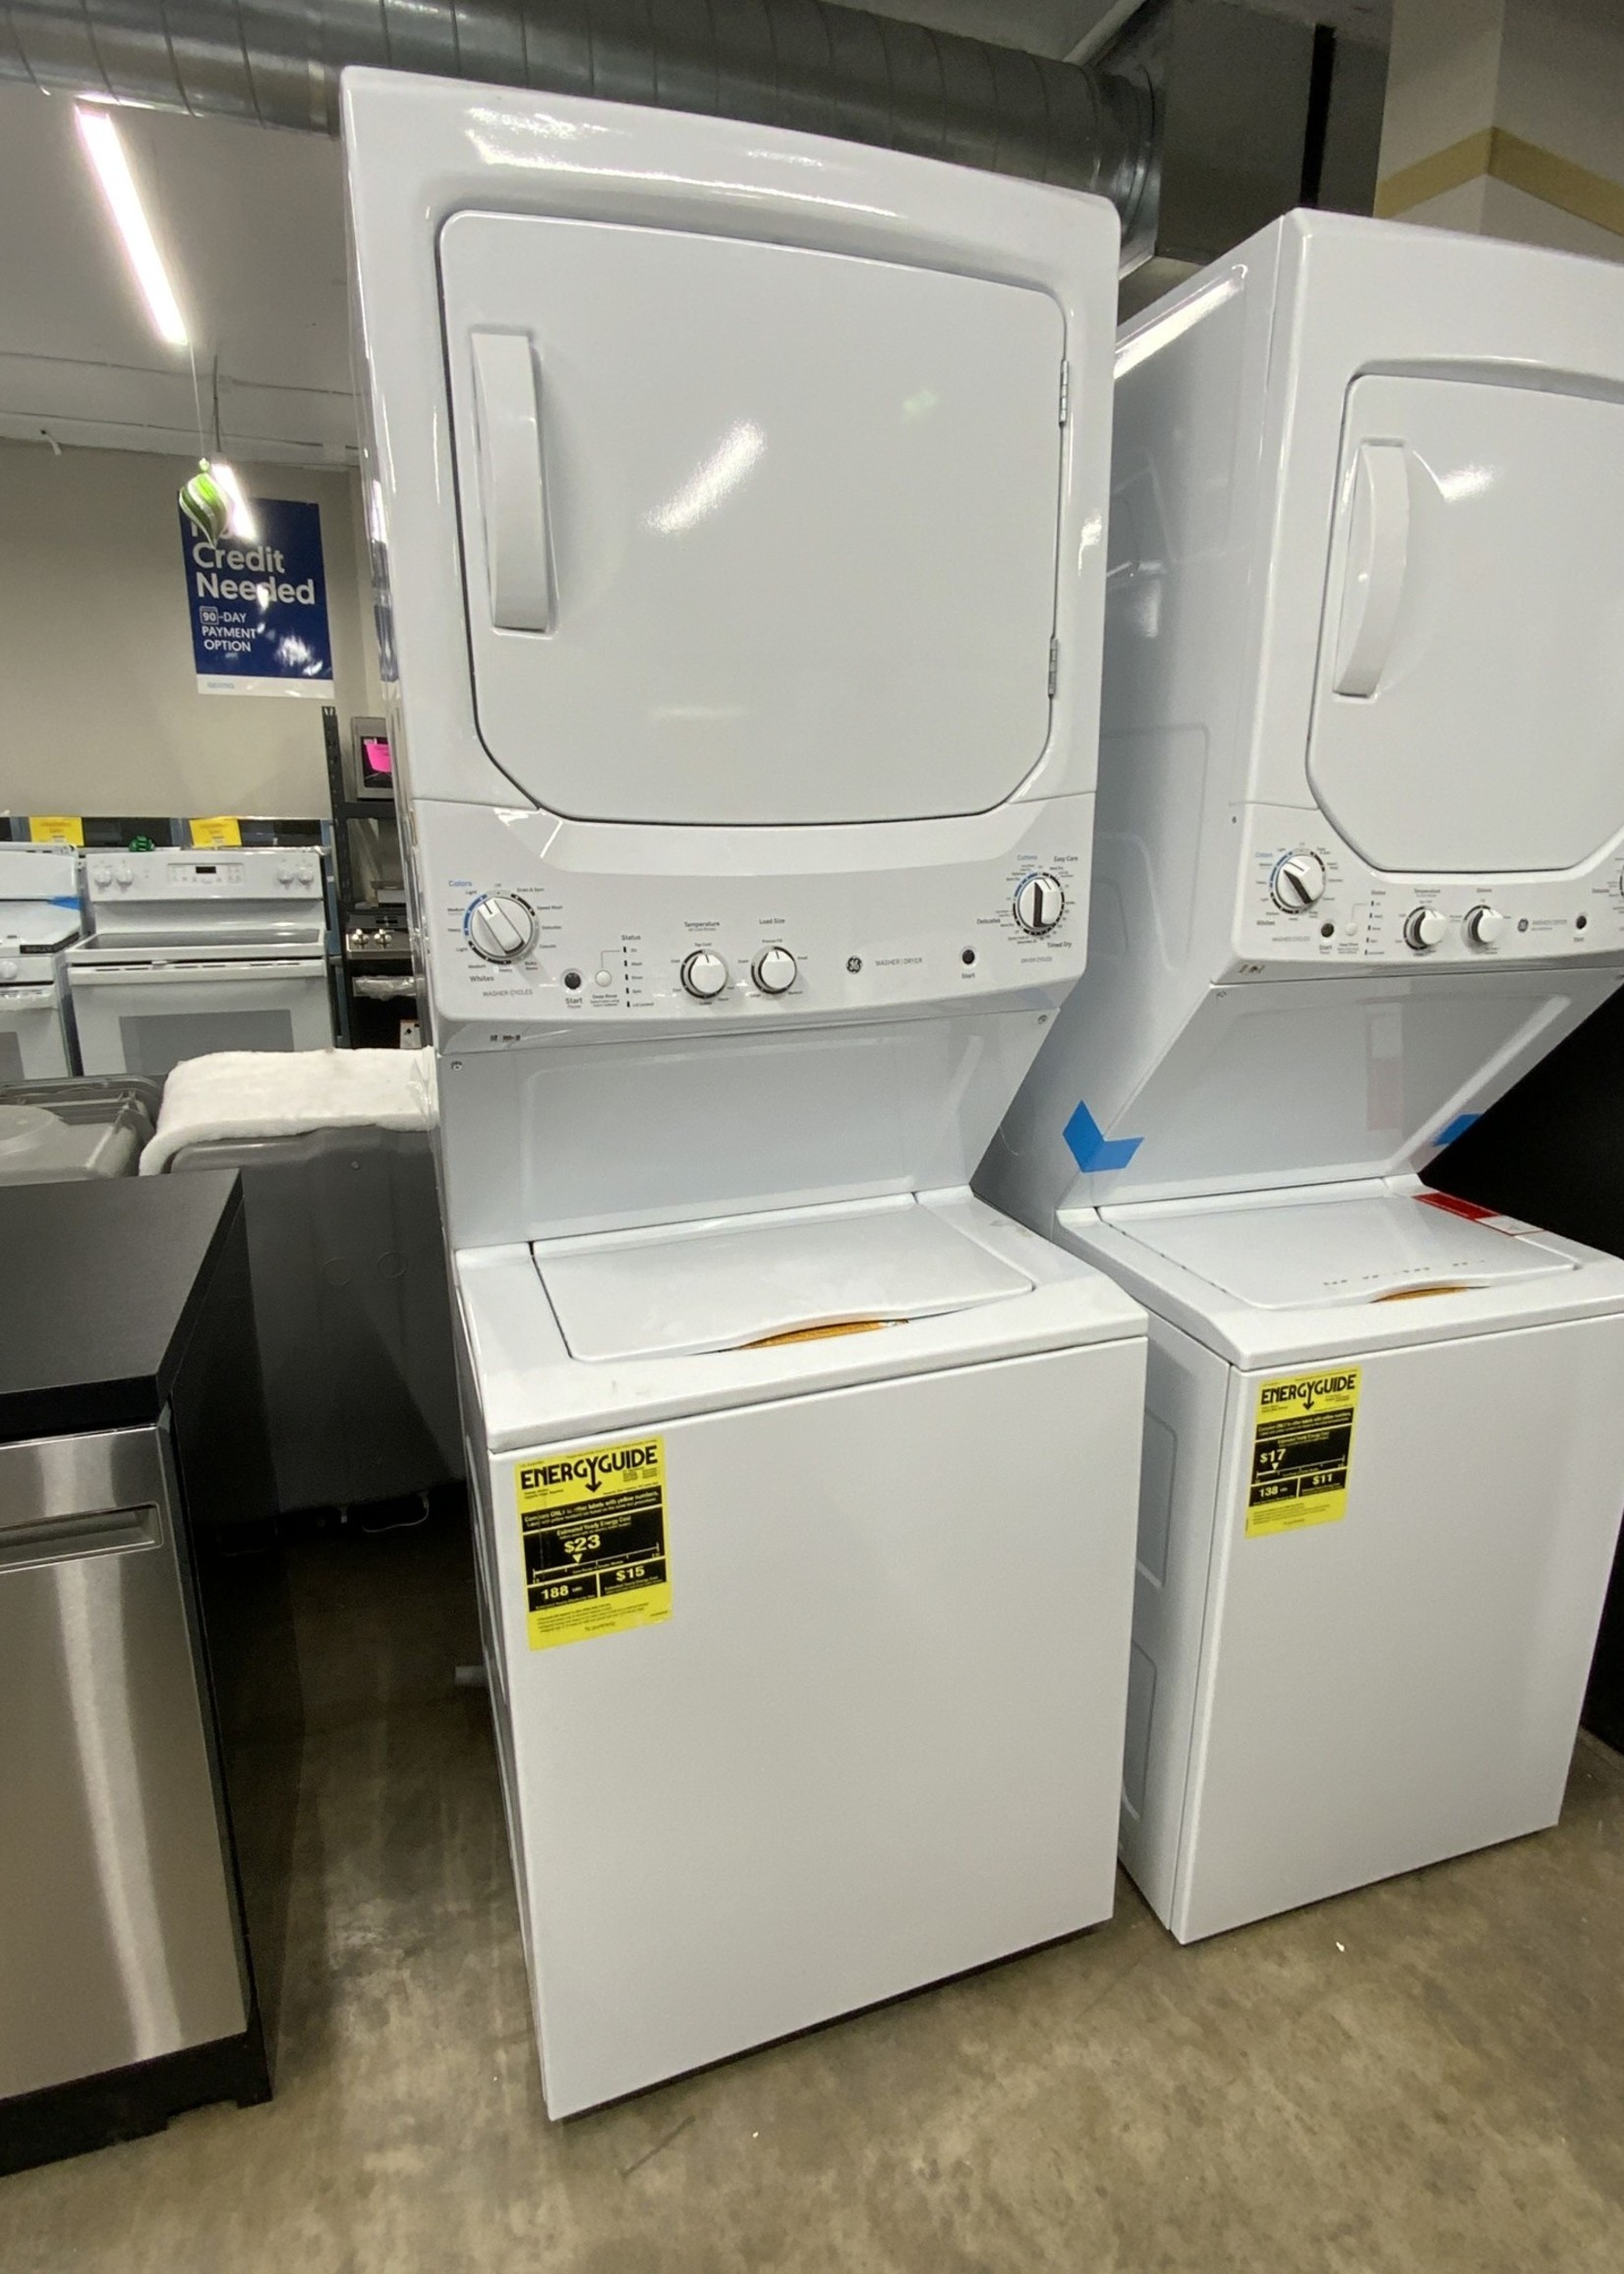 GE GE 27" White Laundry Center 3.8 cu. ft. Washer and 5.9 cu. ft. 240-Volt Vented Electric Dryer